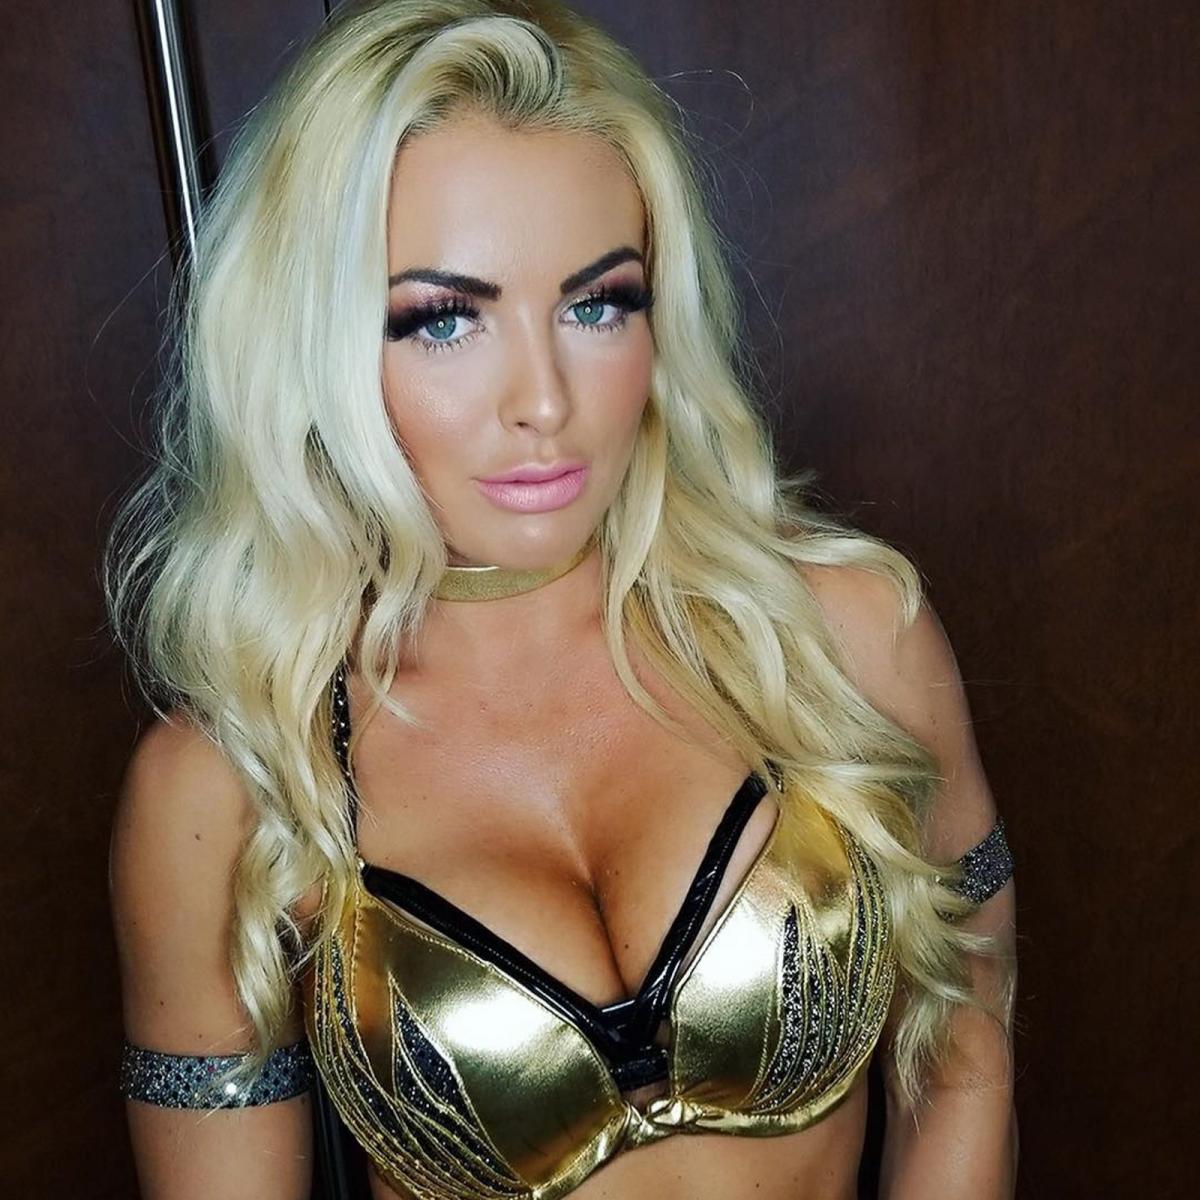 Naked Pictures Of Mandy Rose